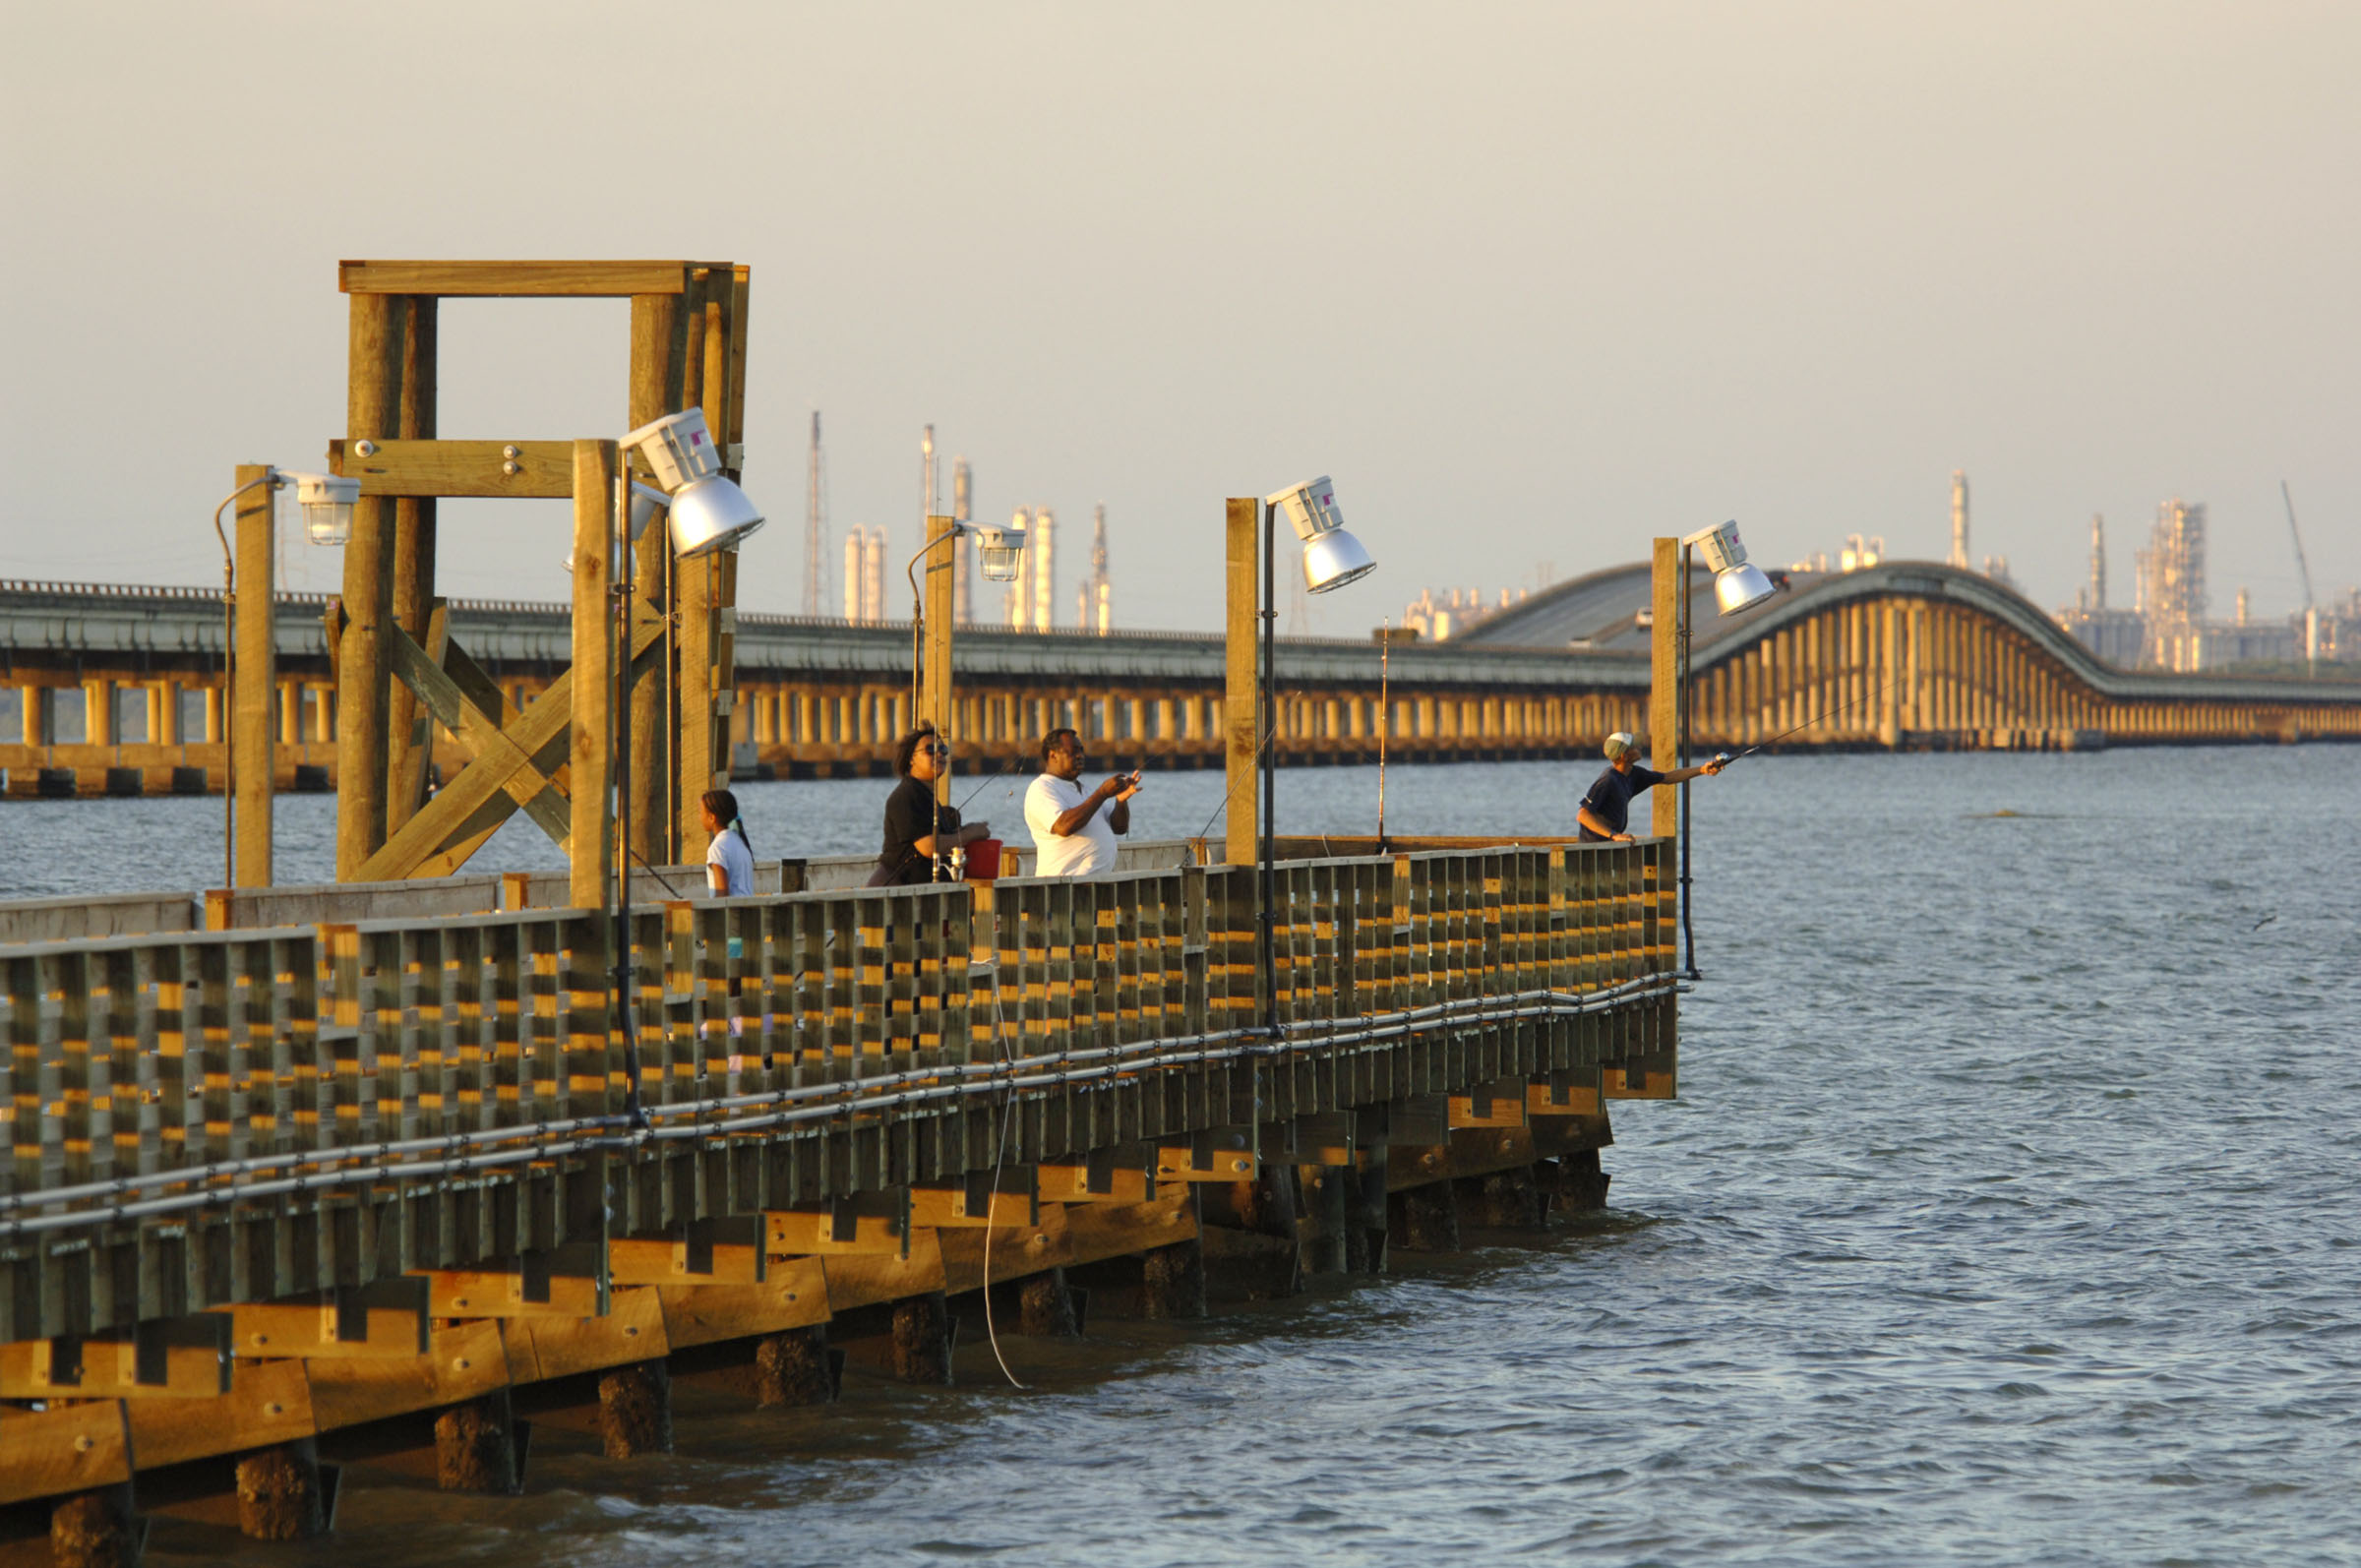 Three people fish off of a wooden pier at sunset.